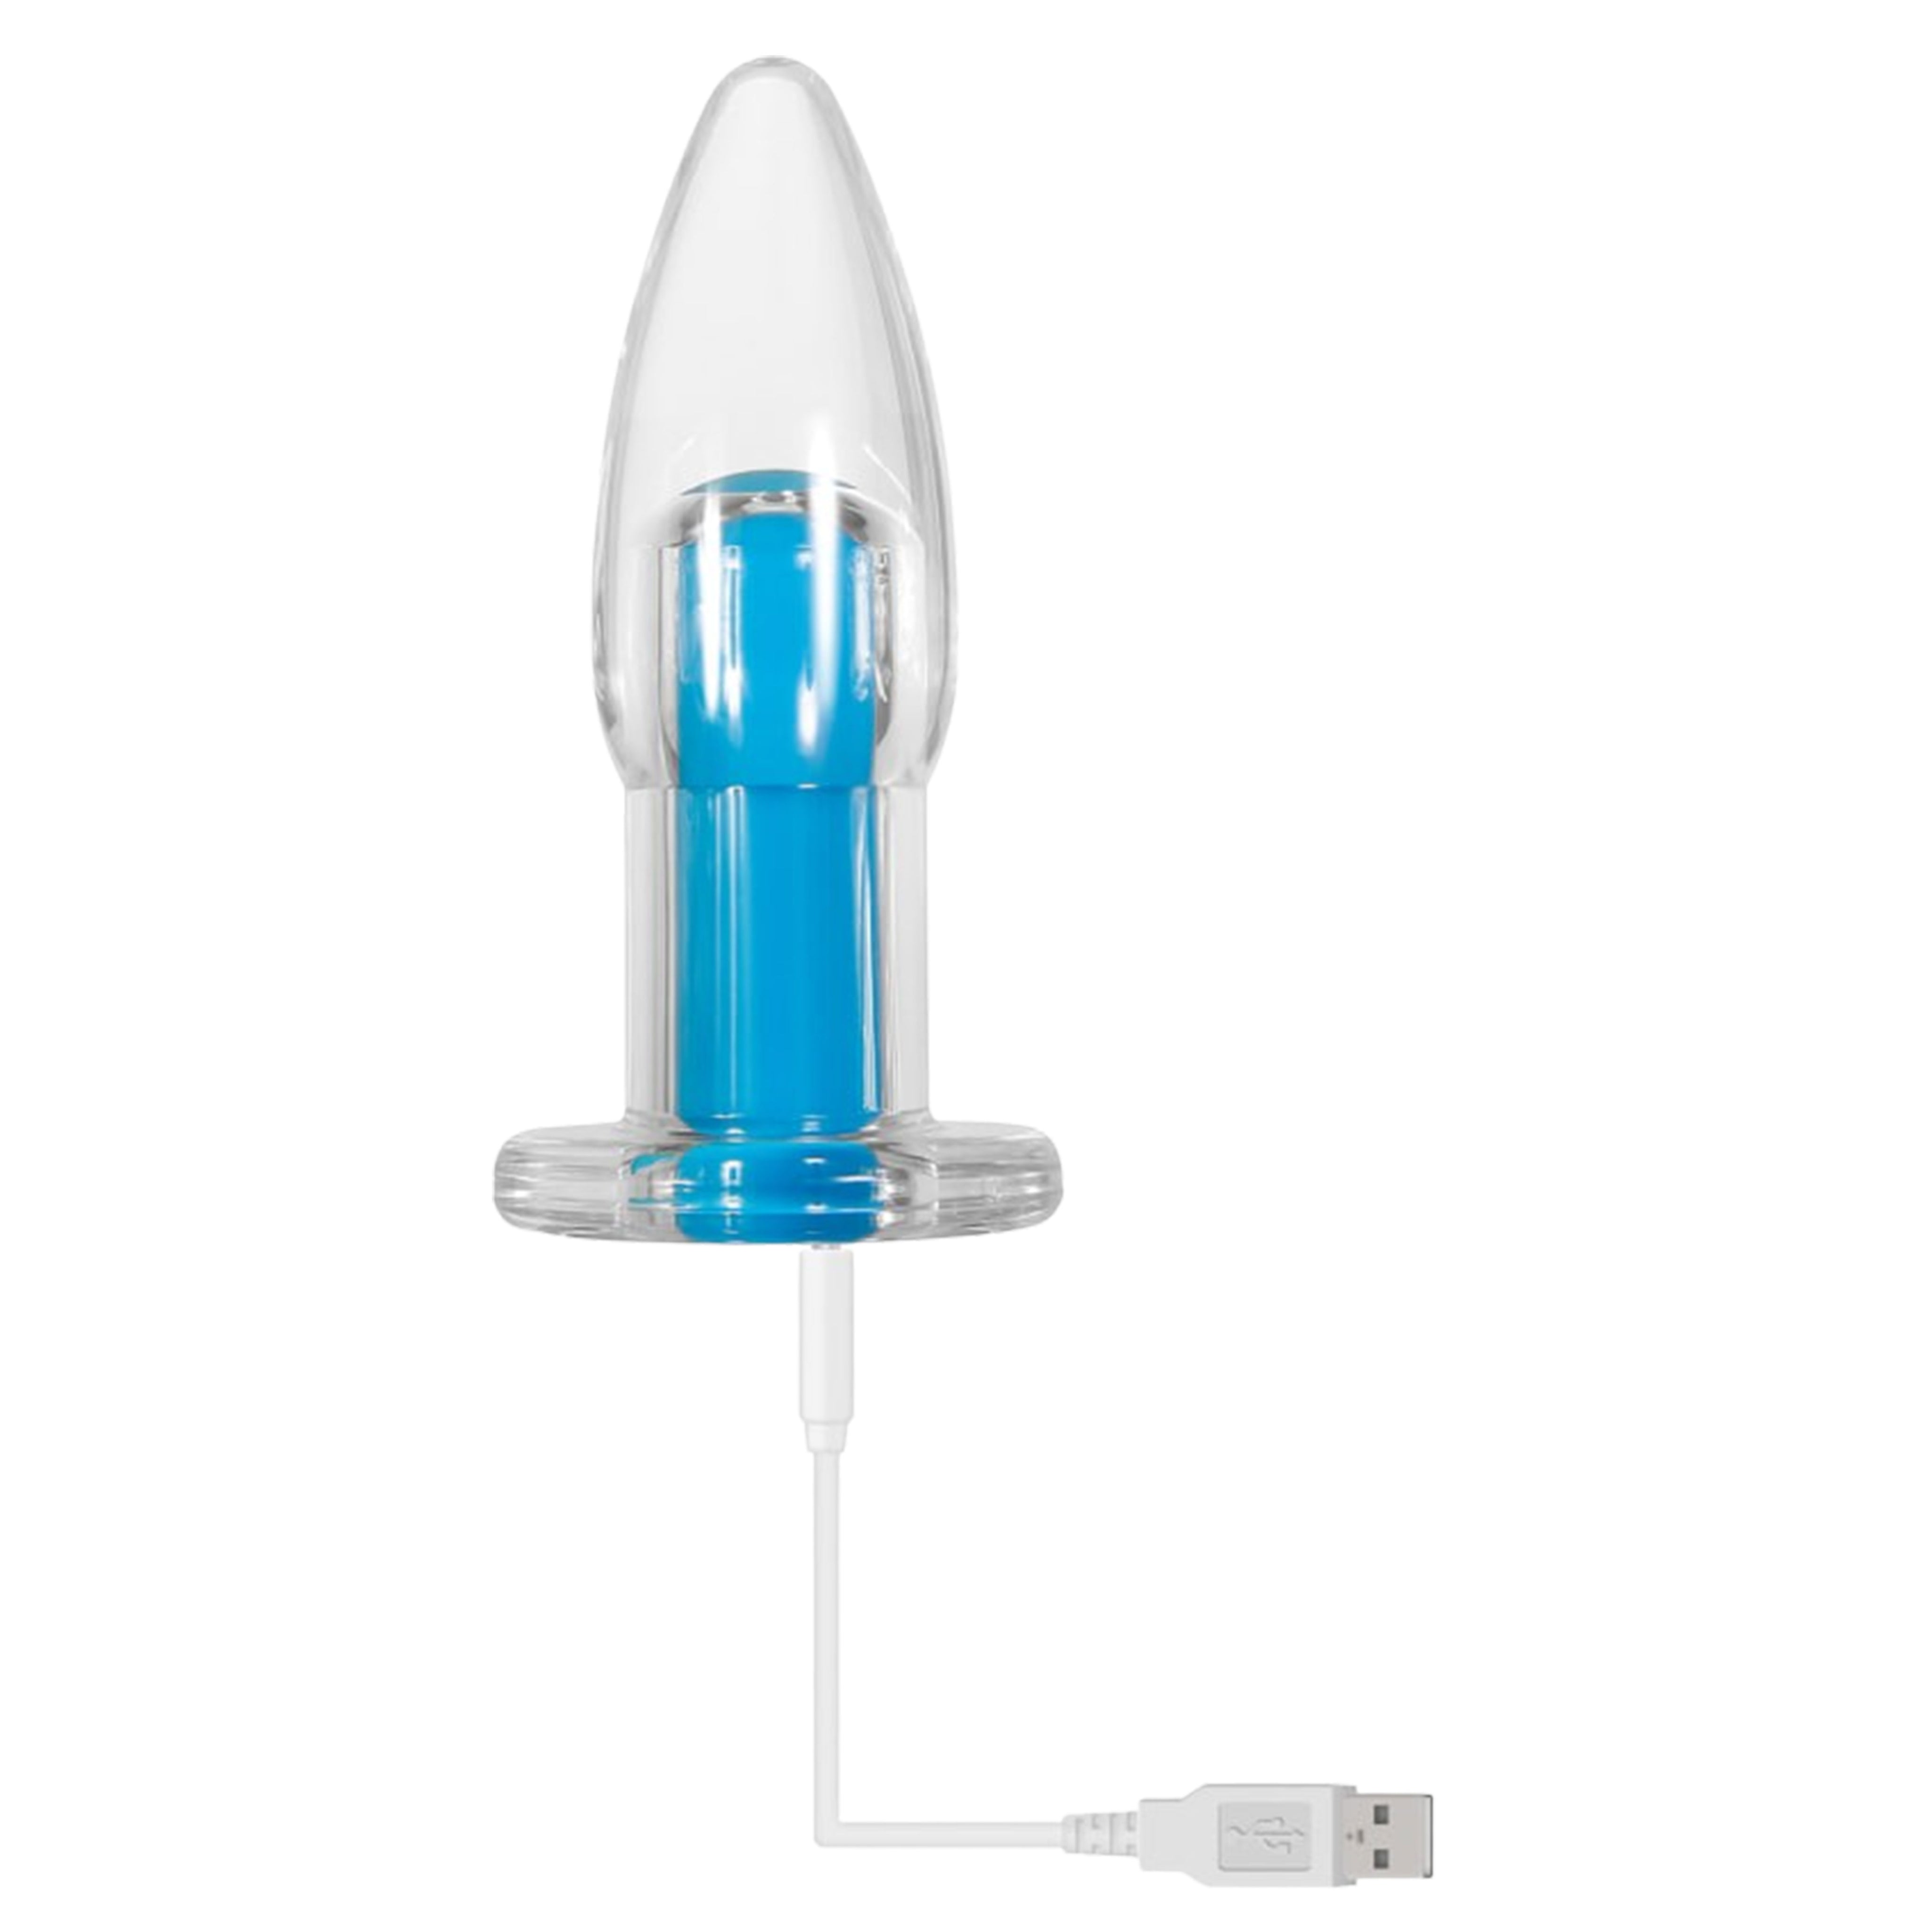 Gender X Electric Blue Silicone Rechargeable Plug with Remote Control